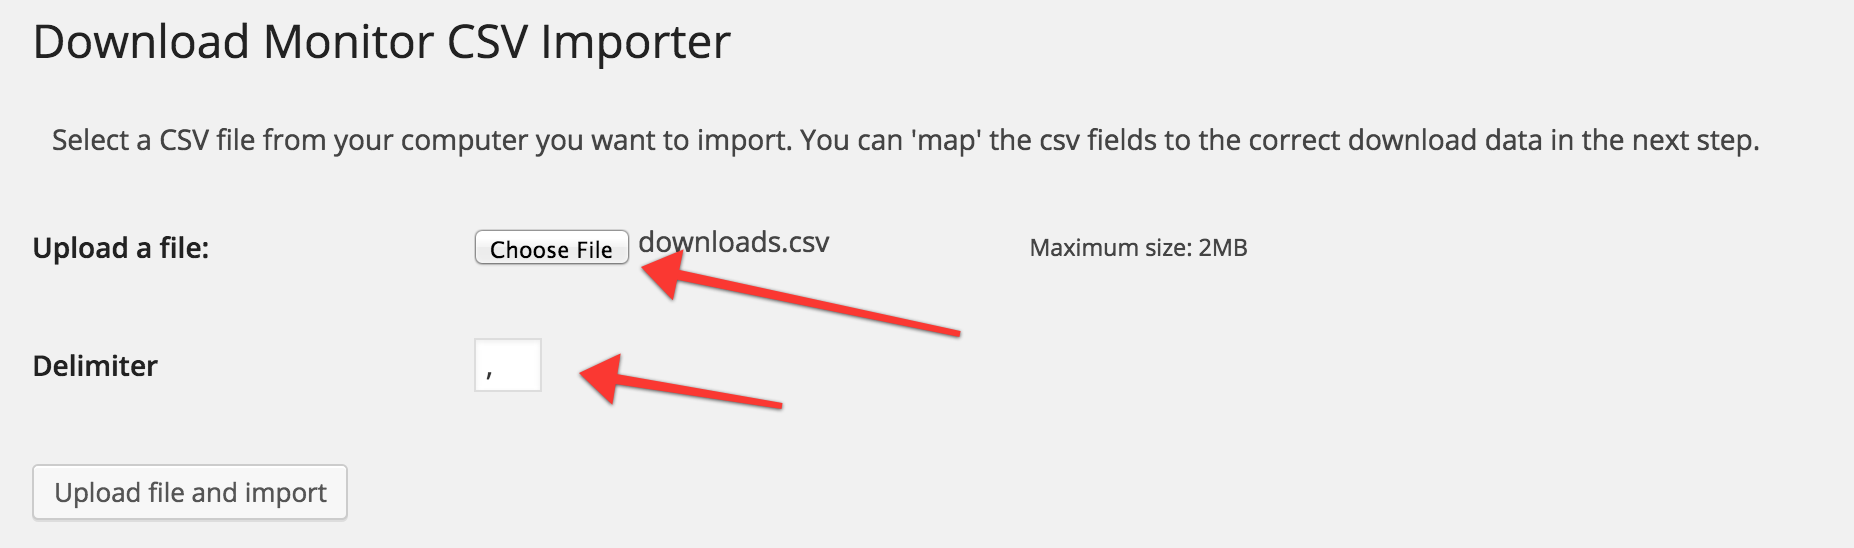 Select the CSV file and set the delimiter